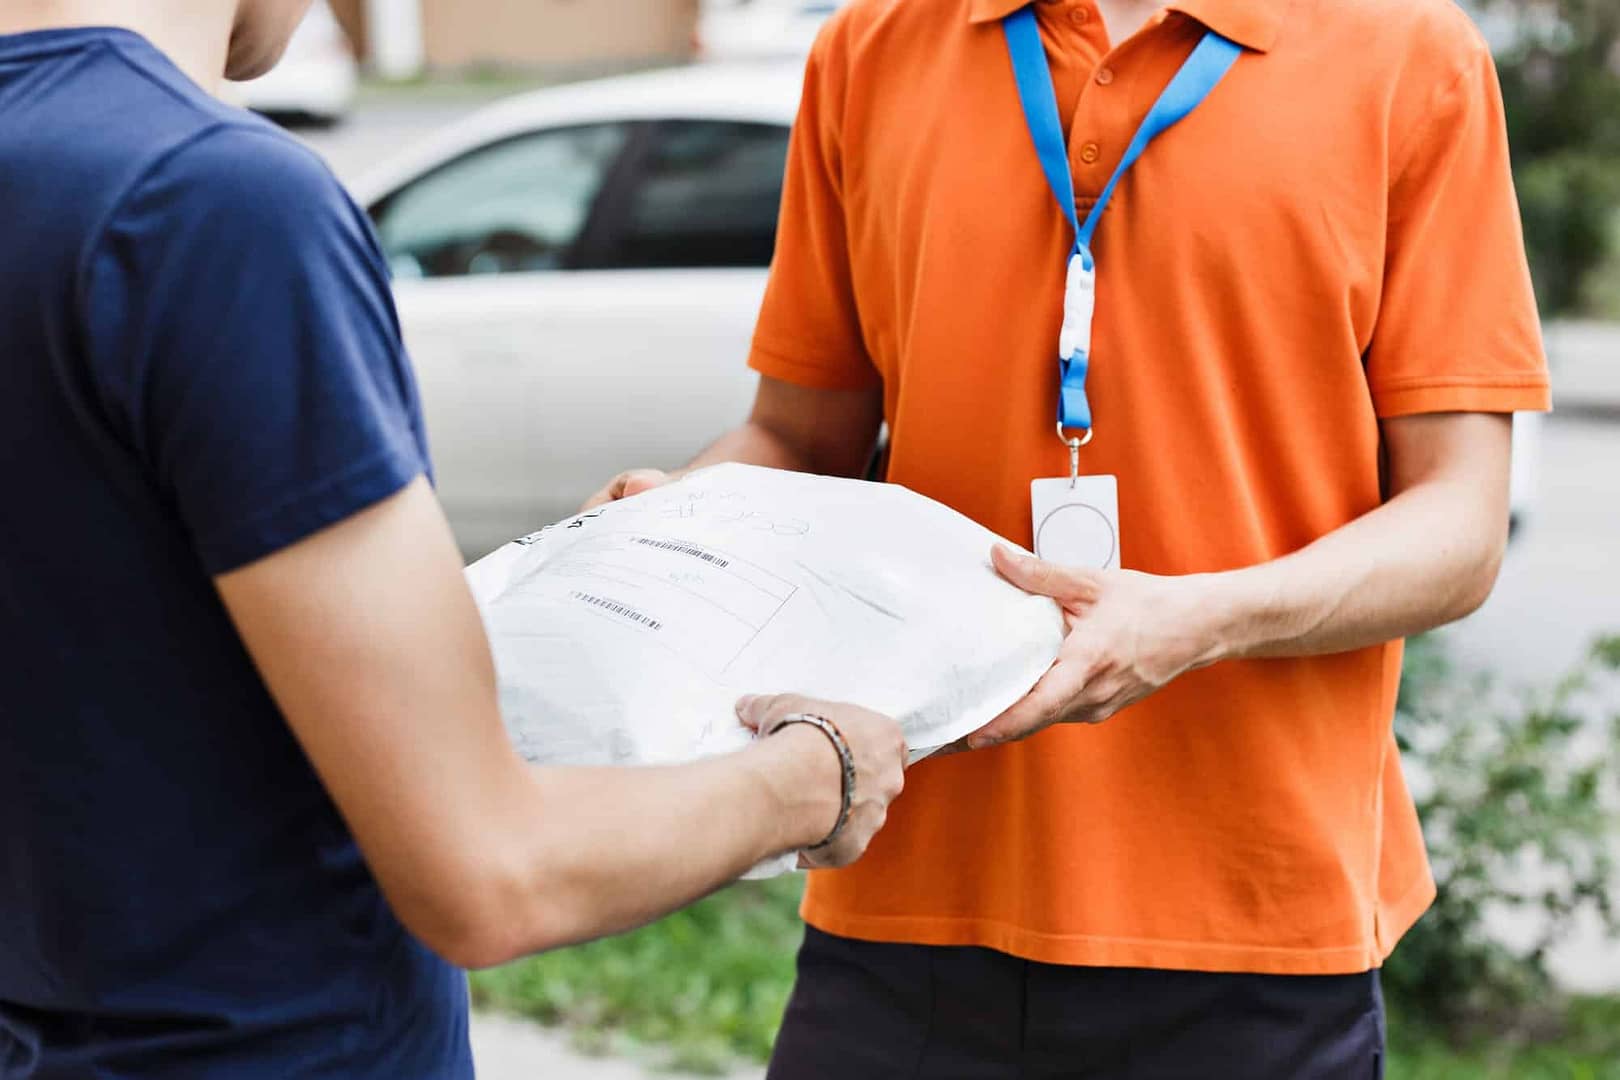 A person wearing an orange T-shirt and a name tag is delivering a parcel to a client. Friendly